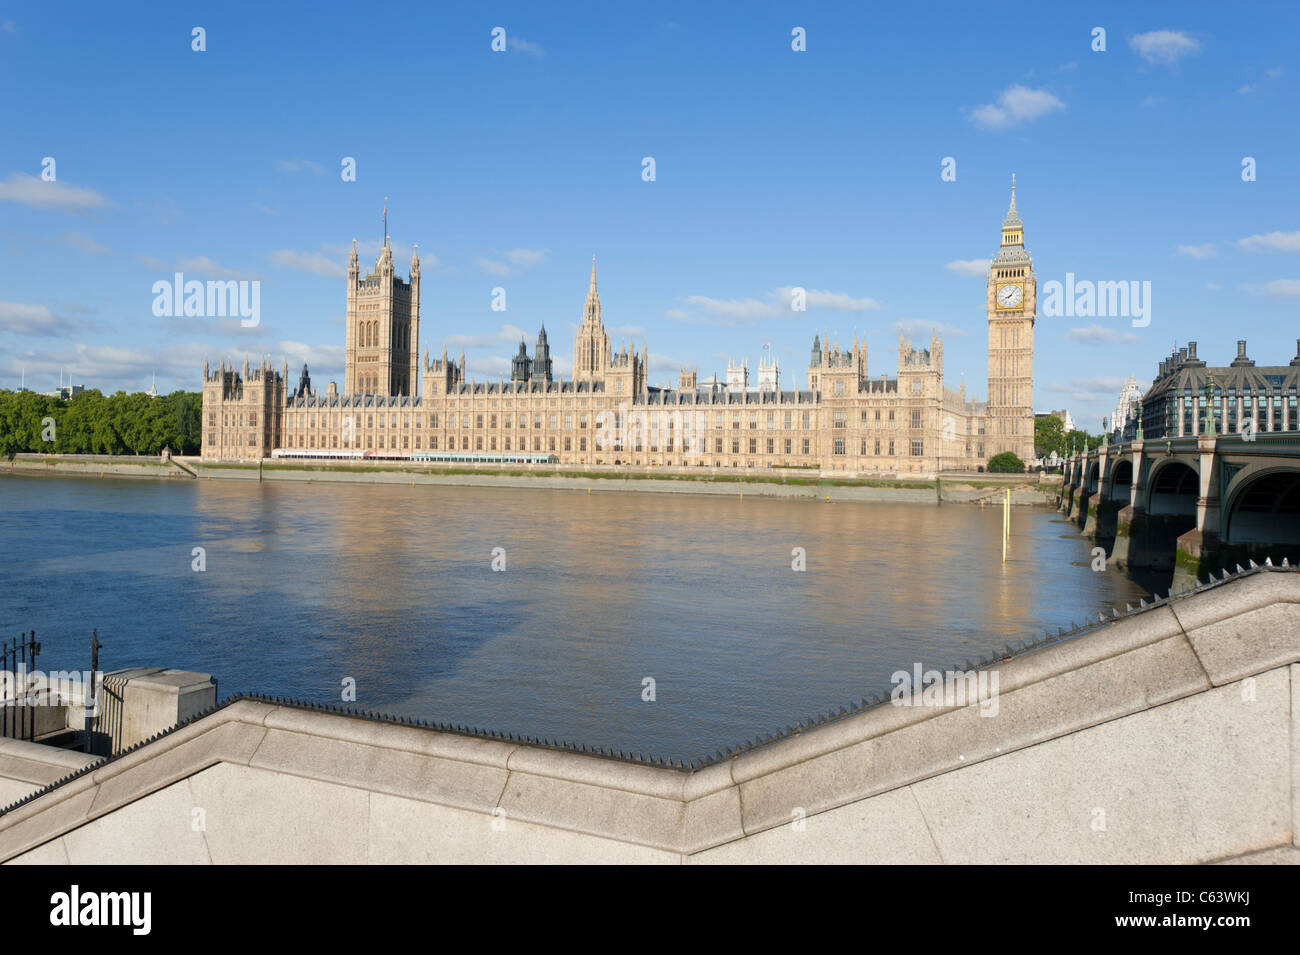 The Houses of Parliament in London, England, UK, beside the River Thames. As seen from the opposite bank. Stock Photo